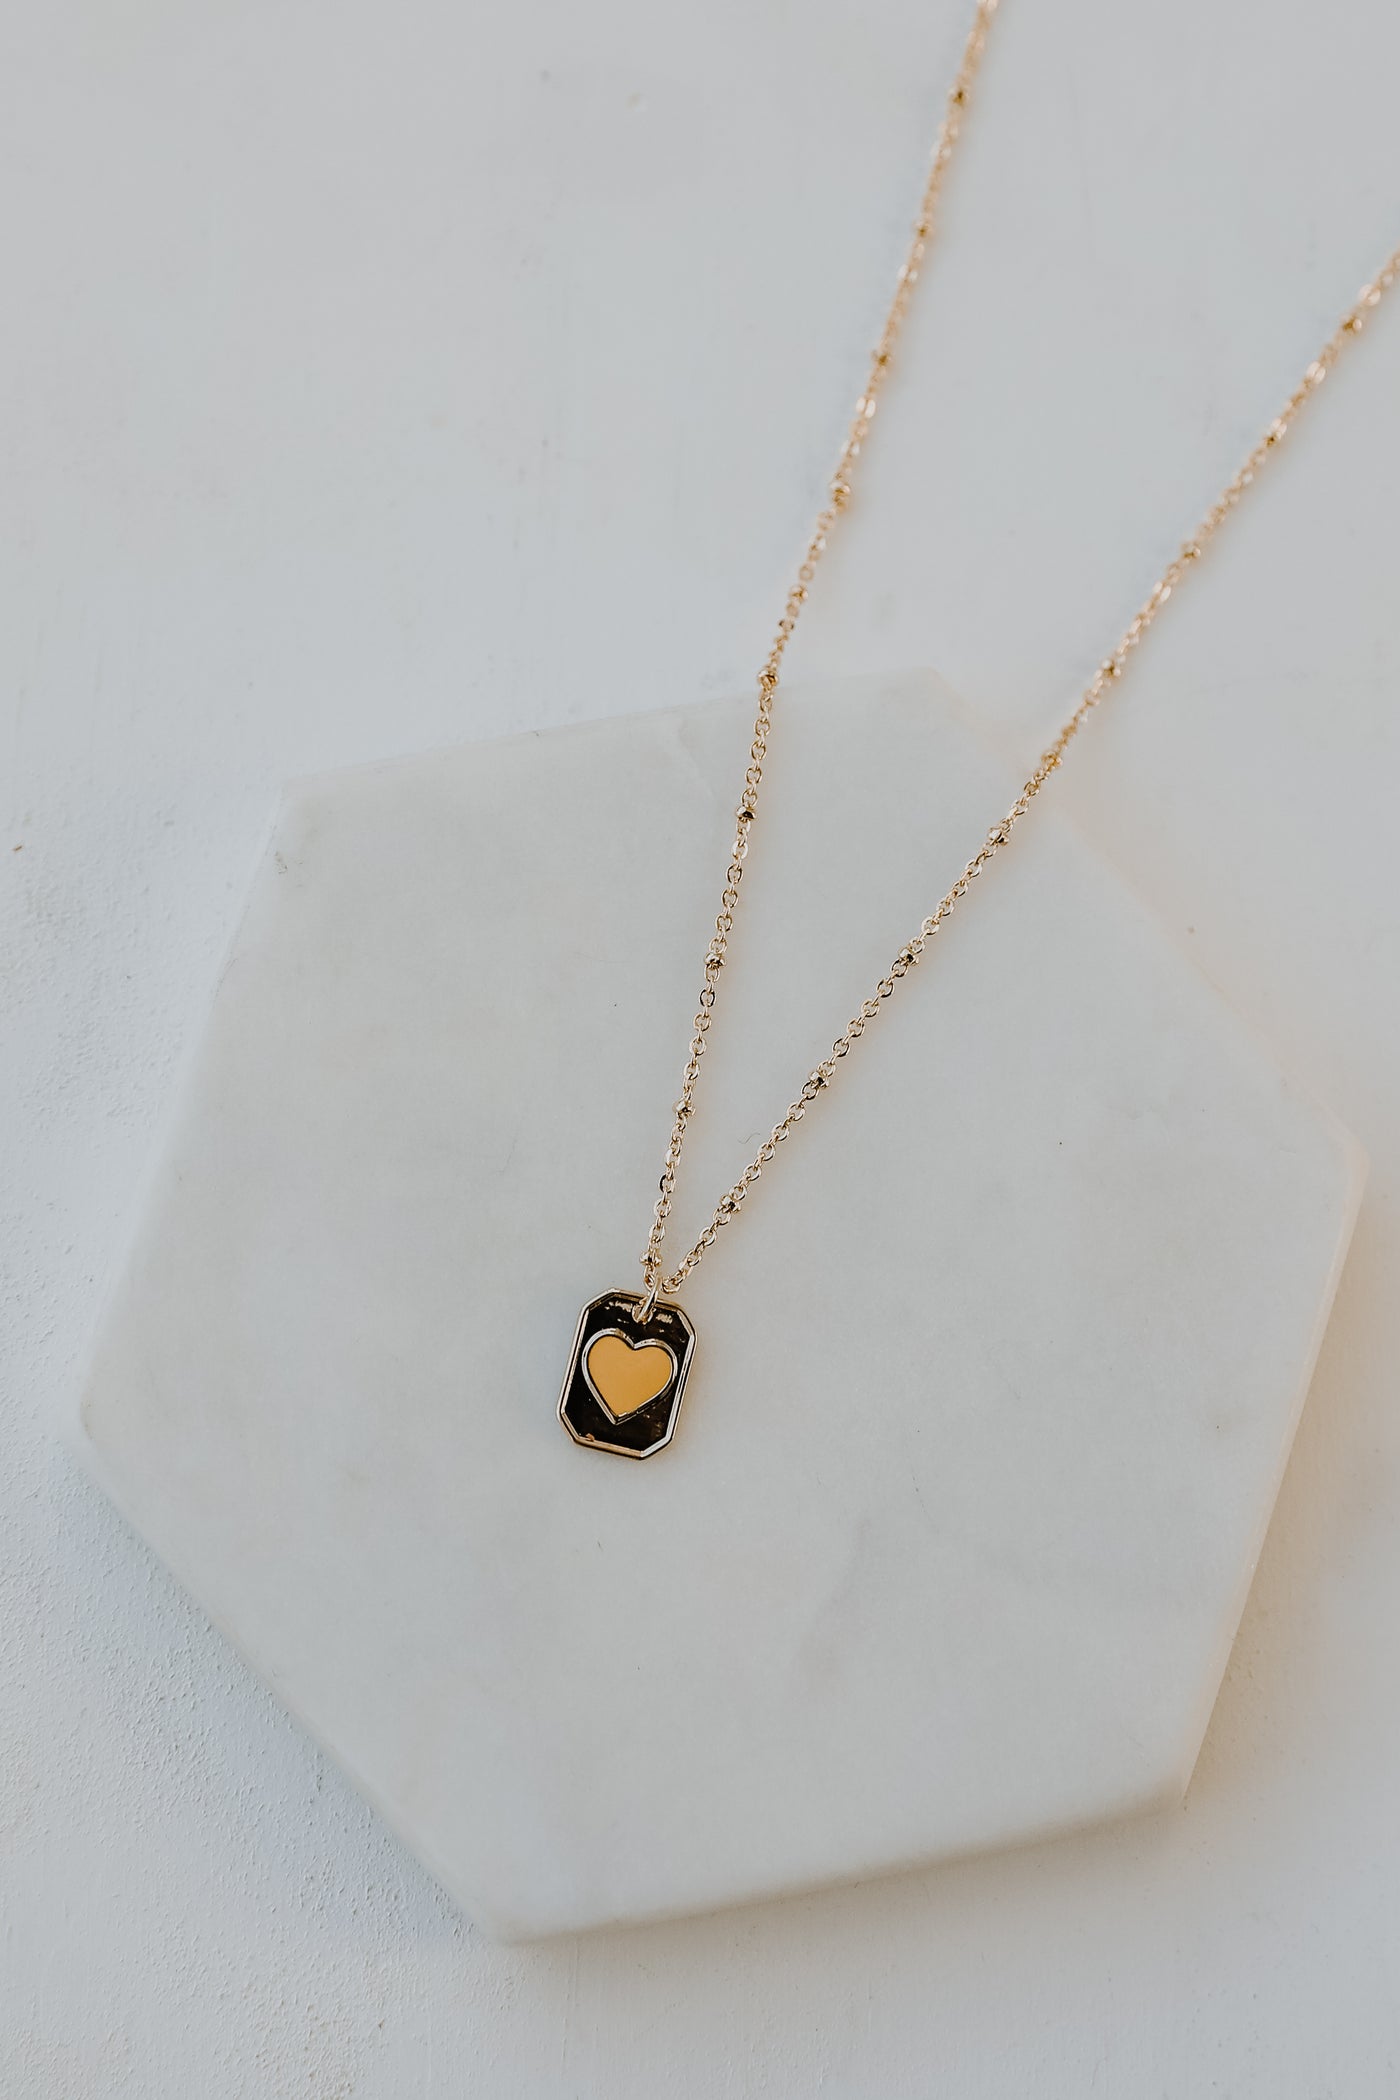 Gold Heart Pendant Necklace from dress up